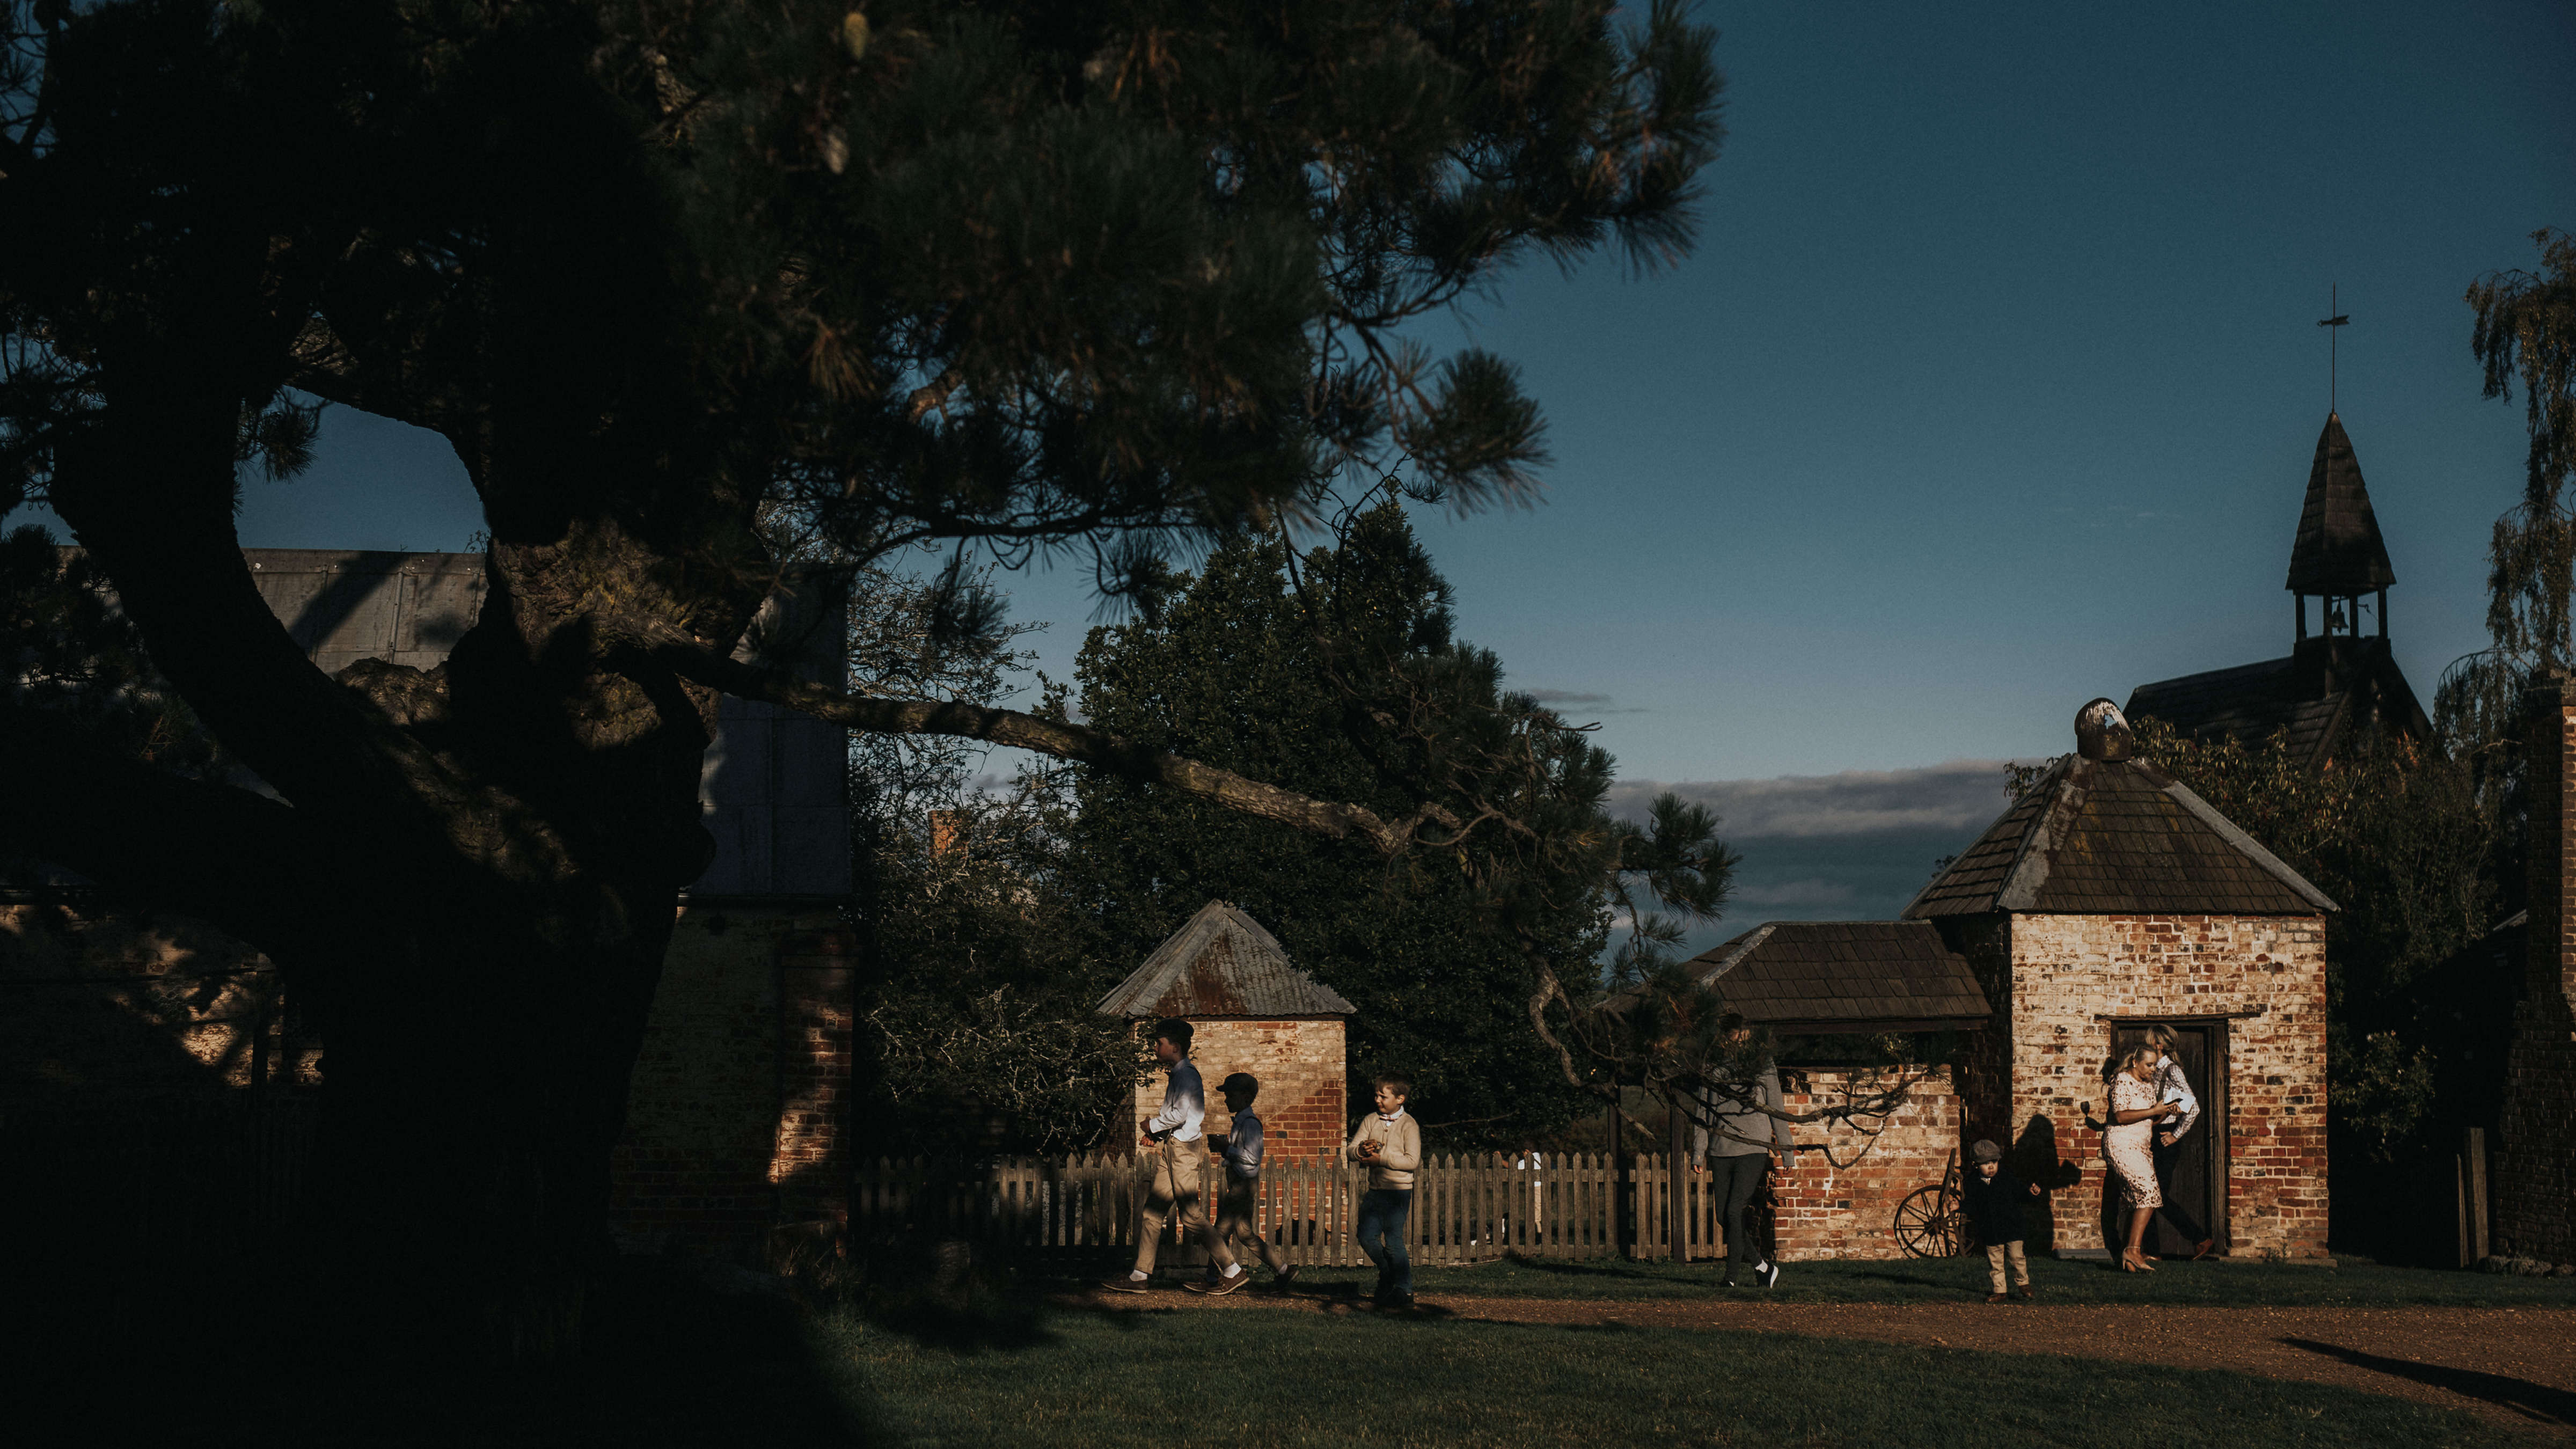 Children walk in front of the smokehouse and picket fence into the shadows of the pine tree. The Chapel can be seen rising up behind the brick smokehouse. Photo: Cassie Sullivan.